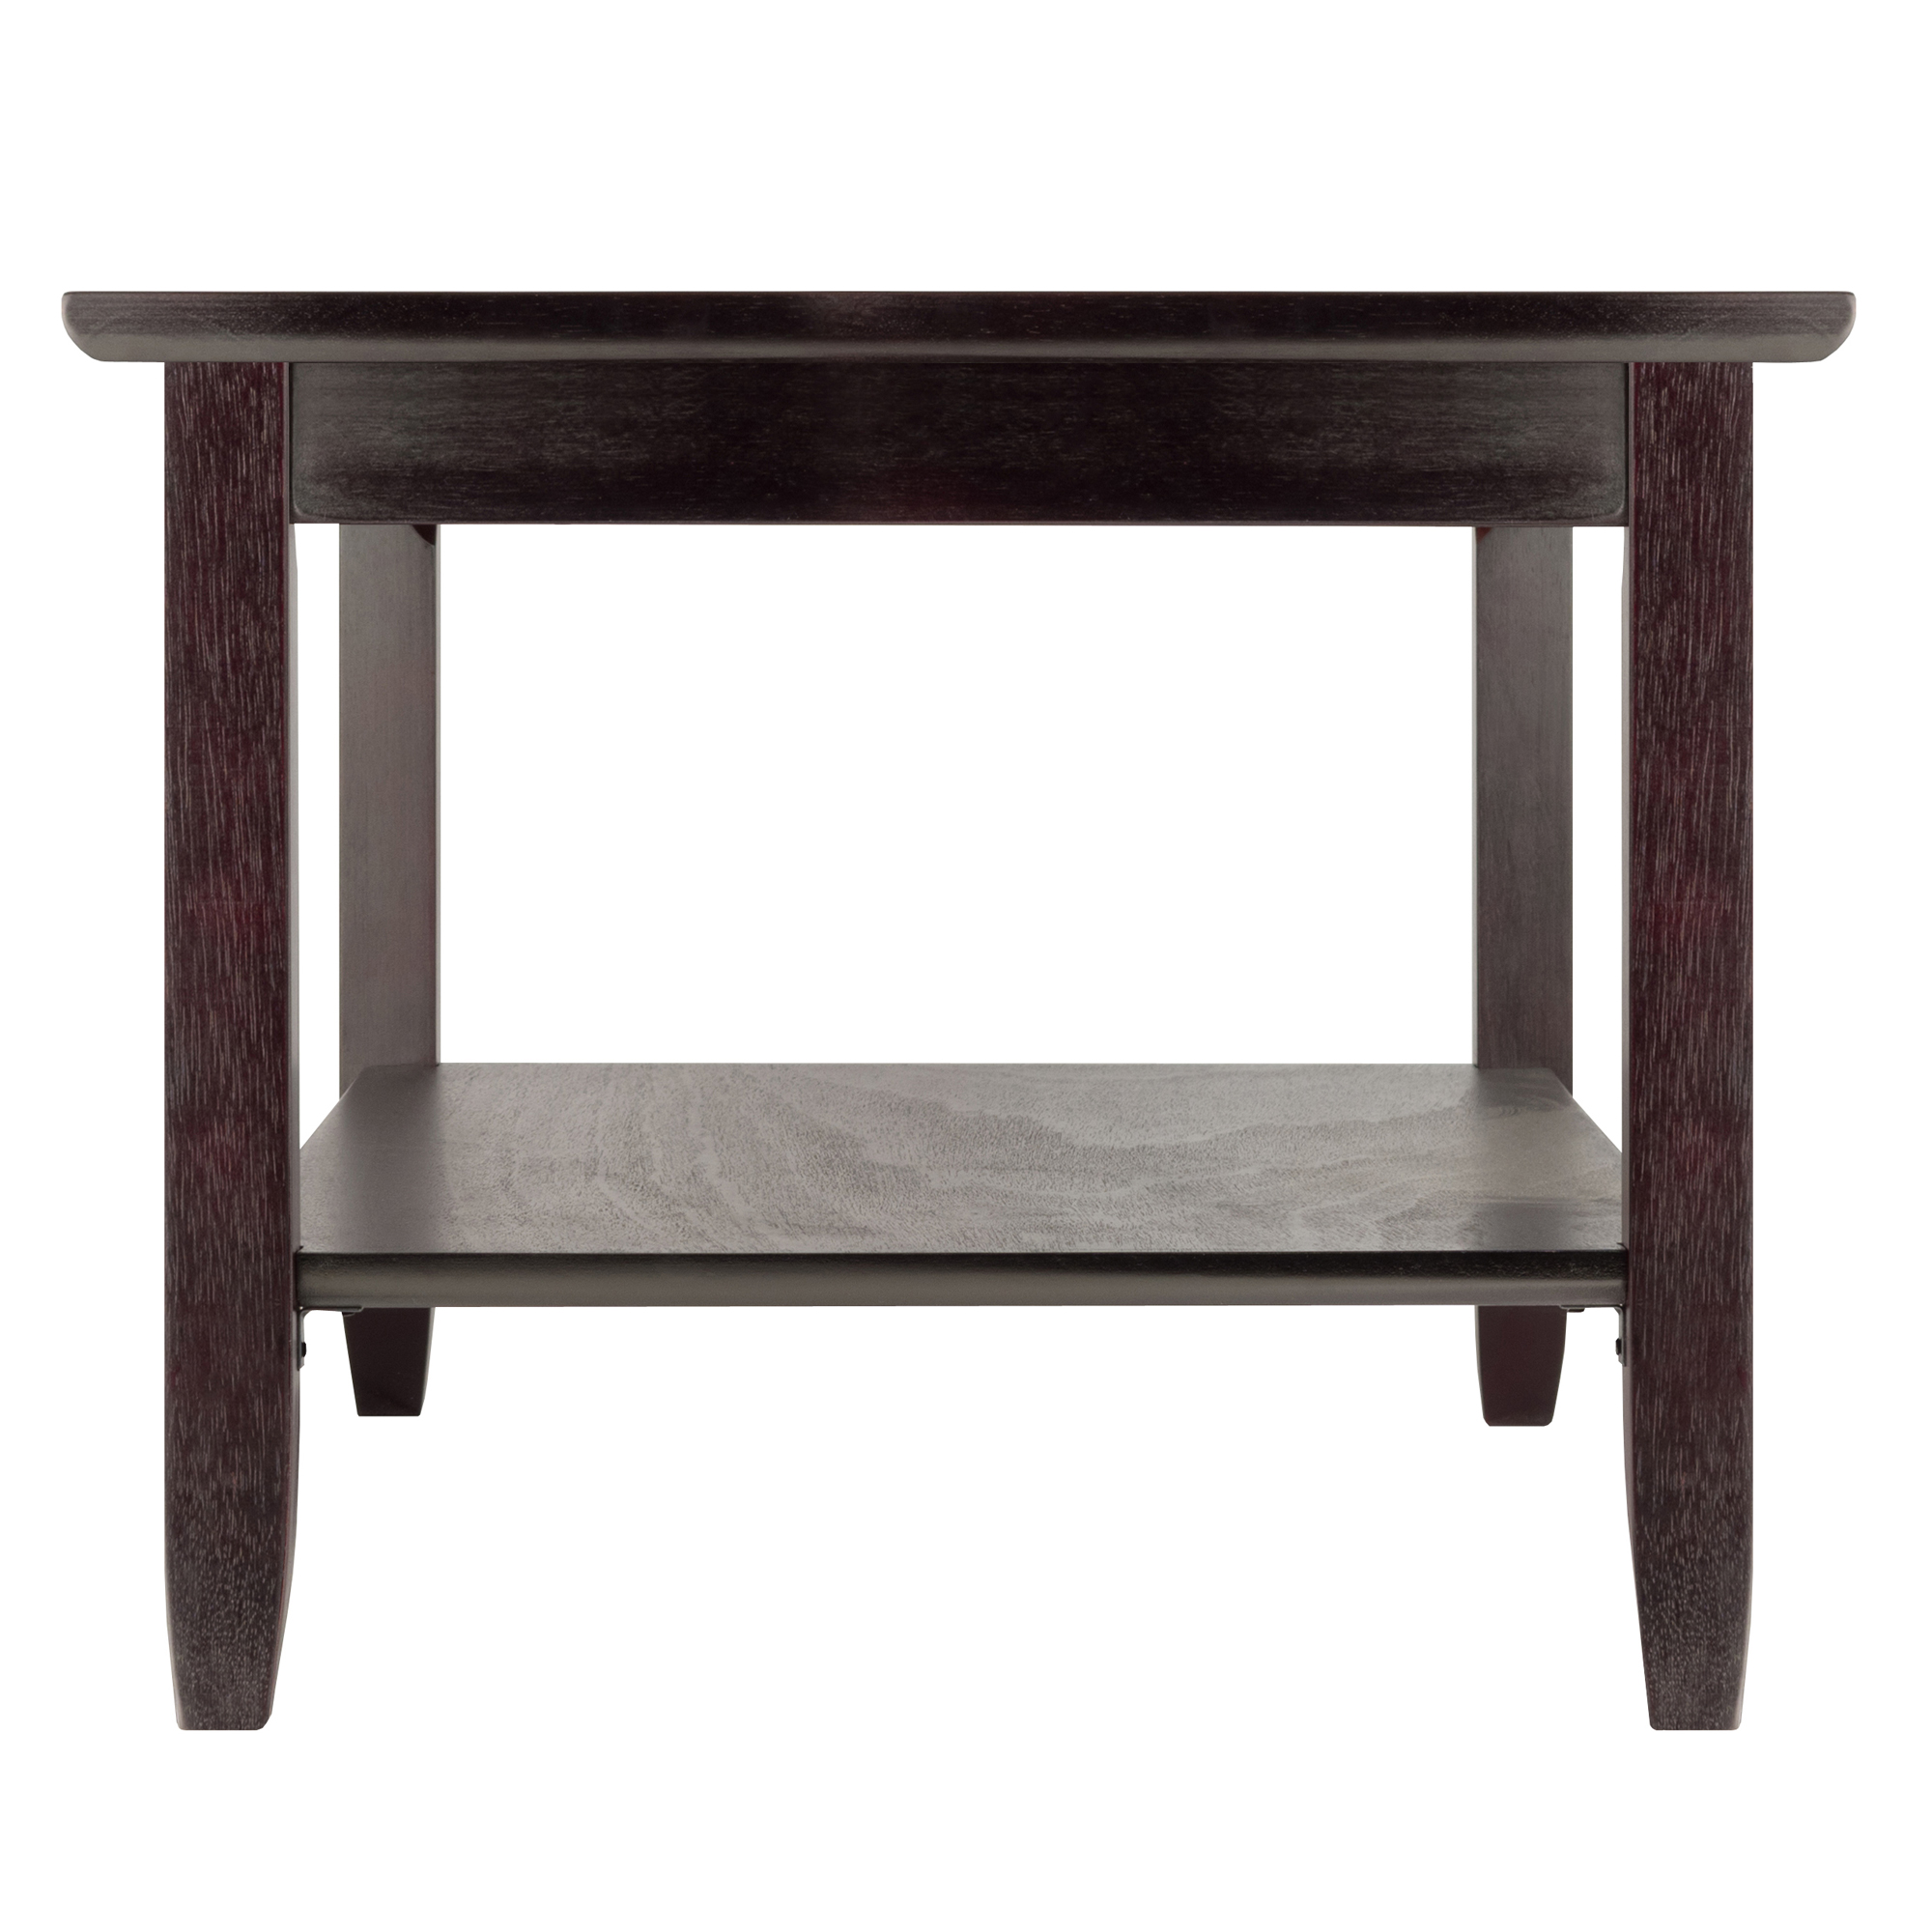 Winsome Wood Genoa Coffee Glass Top Table, Espresso Finish - image 4 of 5